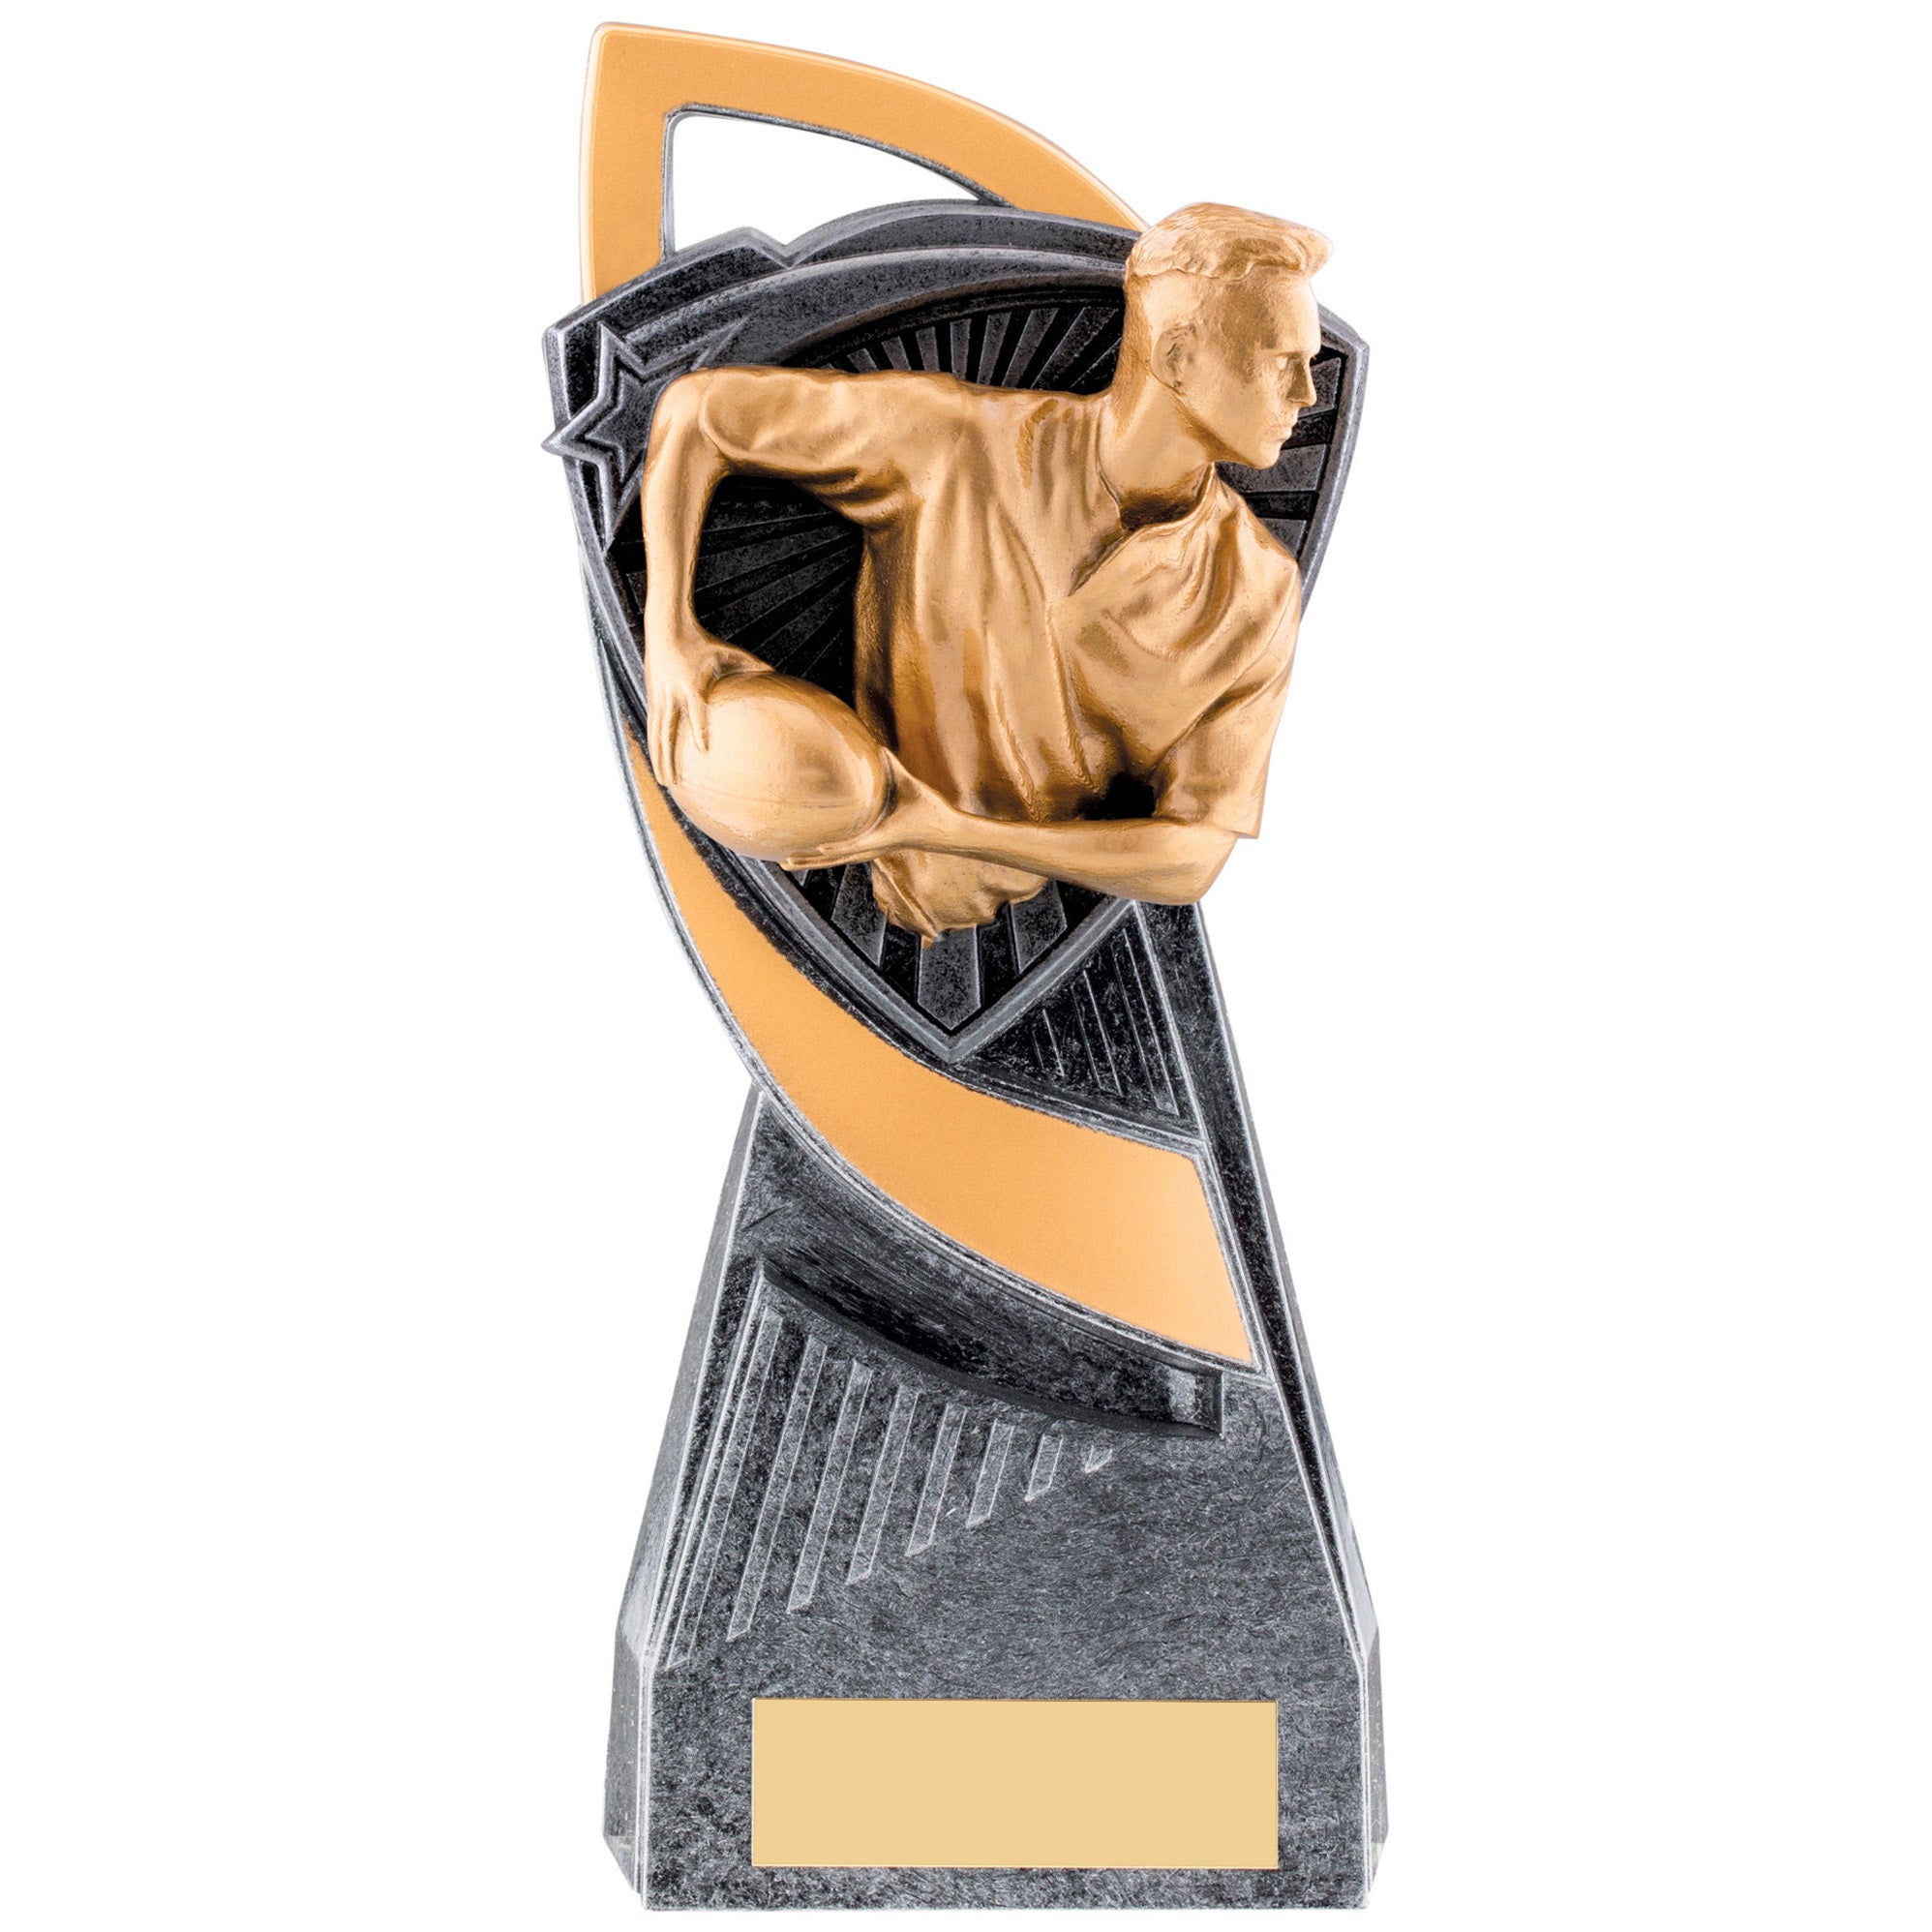 Utopia Male Rugby Trophy (Gold/Silver)